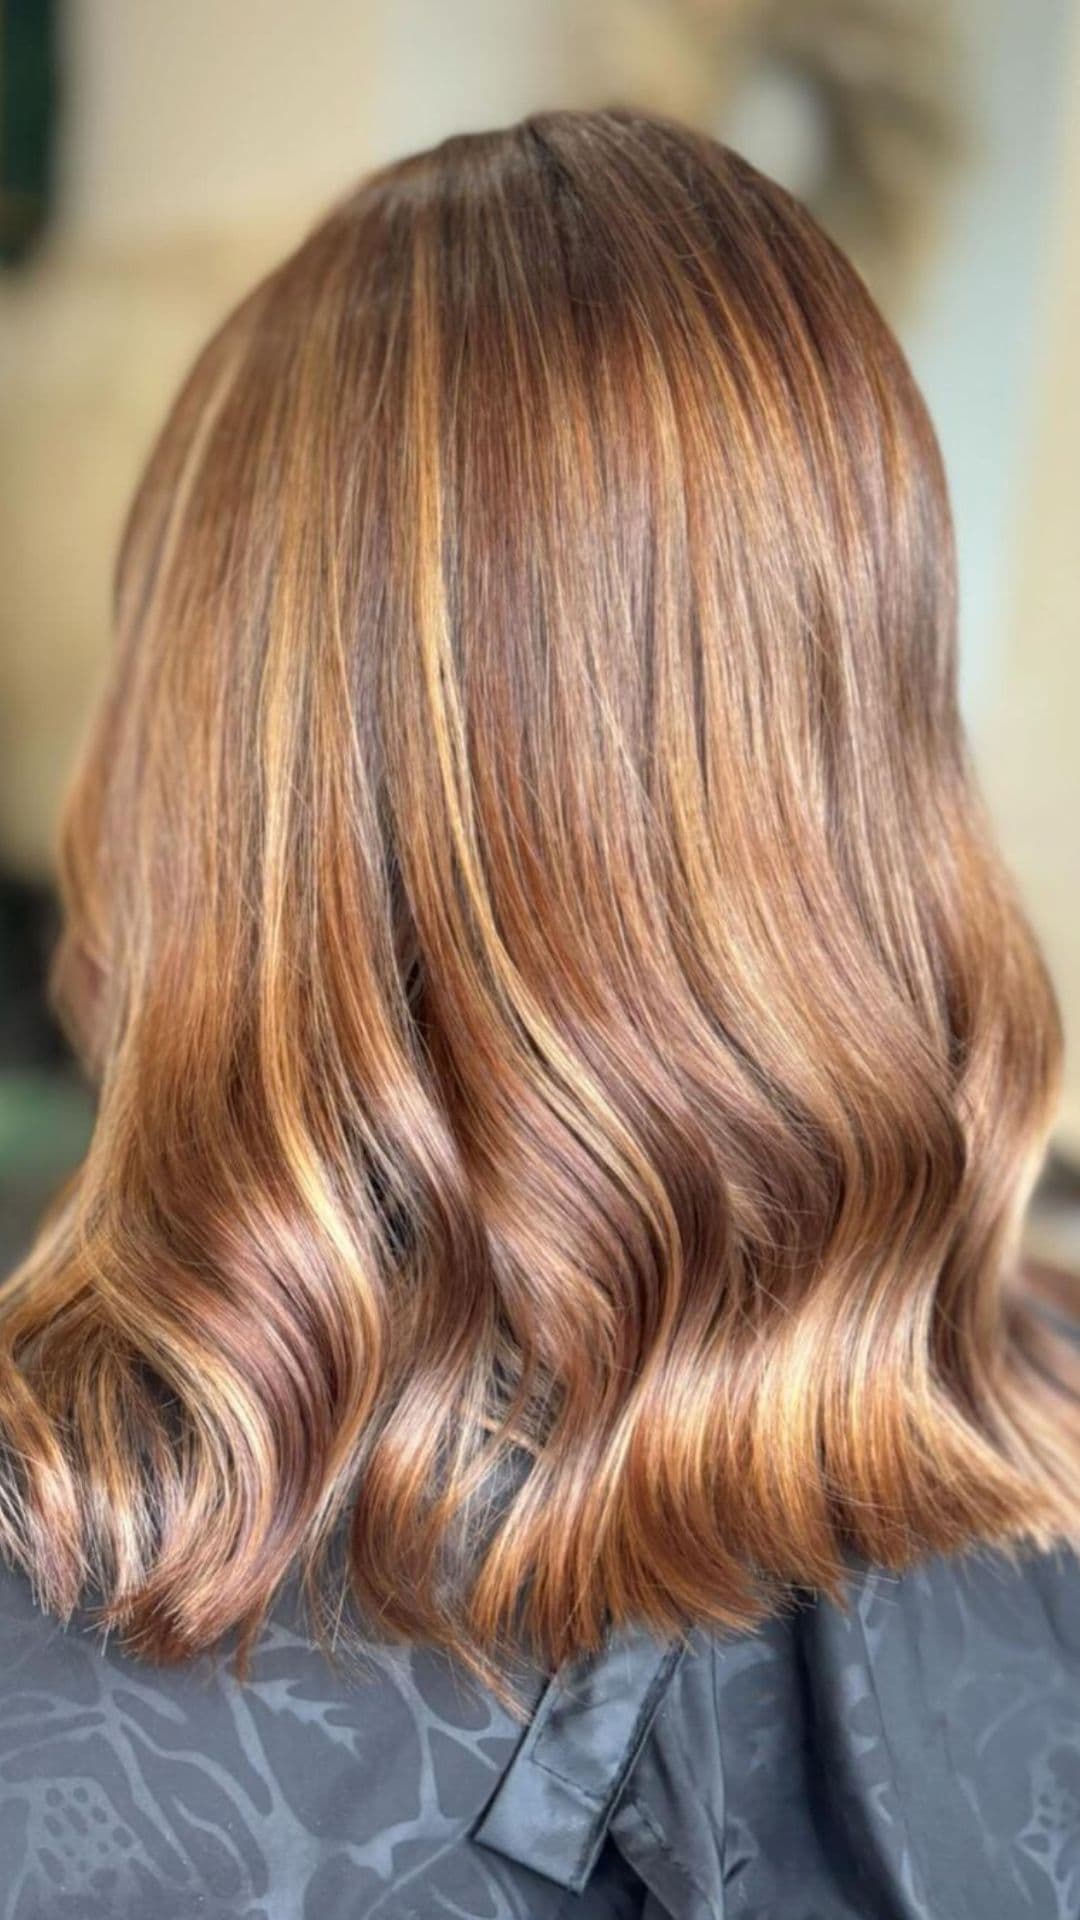 A woman modelling a chestnut balayage on light golden brown hair color.